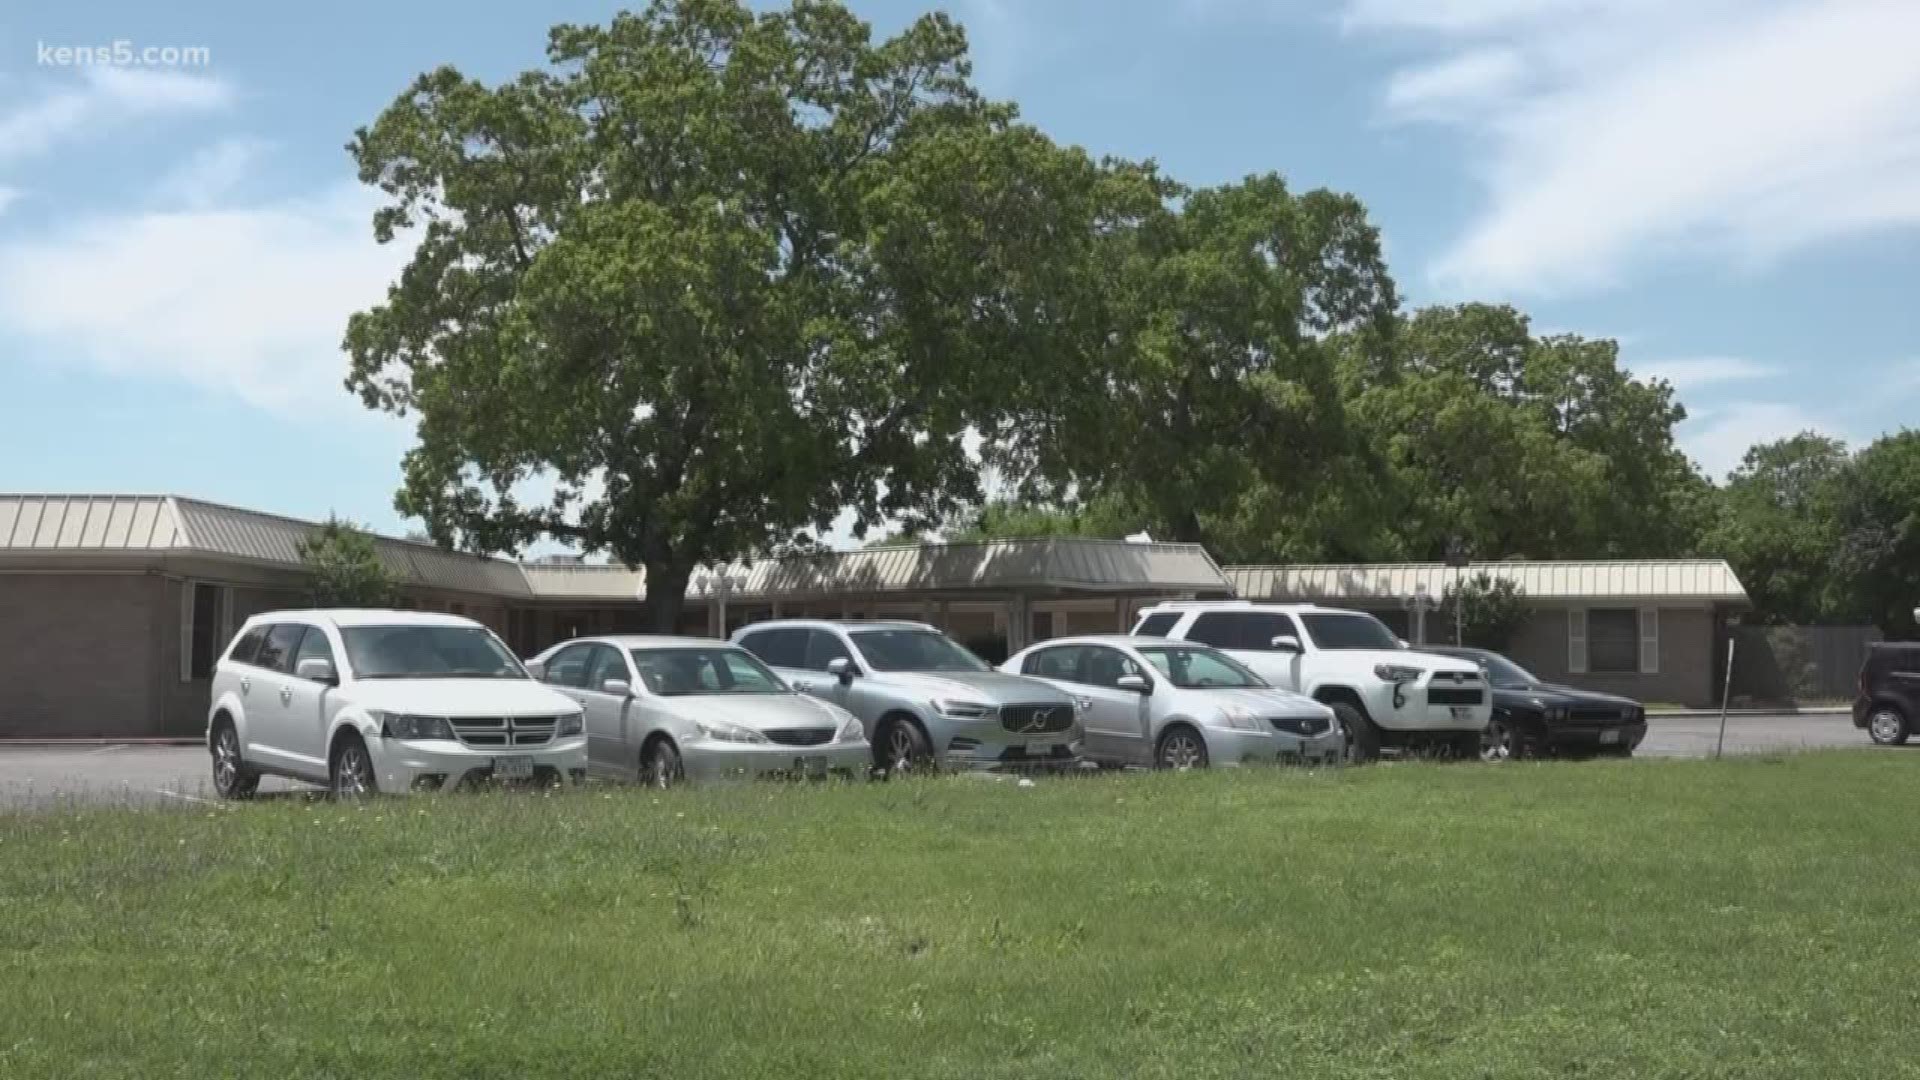 More than 70 residents at the nursing home have tested positive for the virus, and nearly 20 have died from complications.